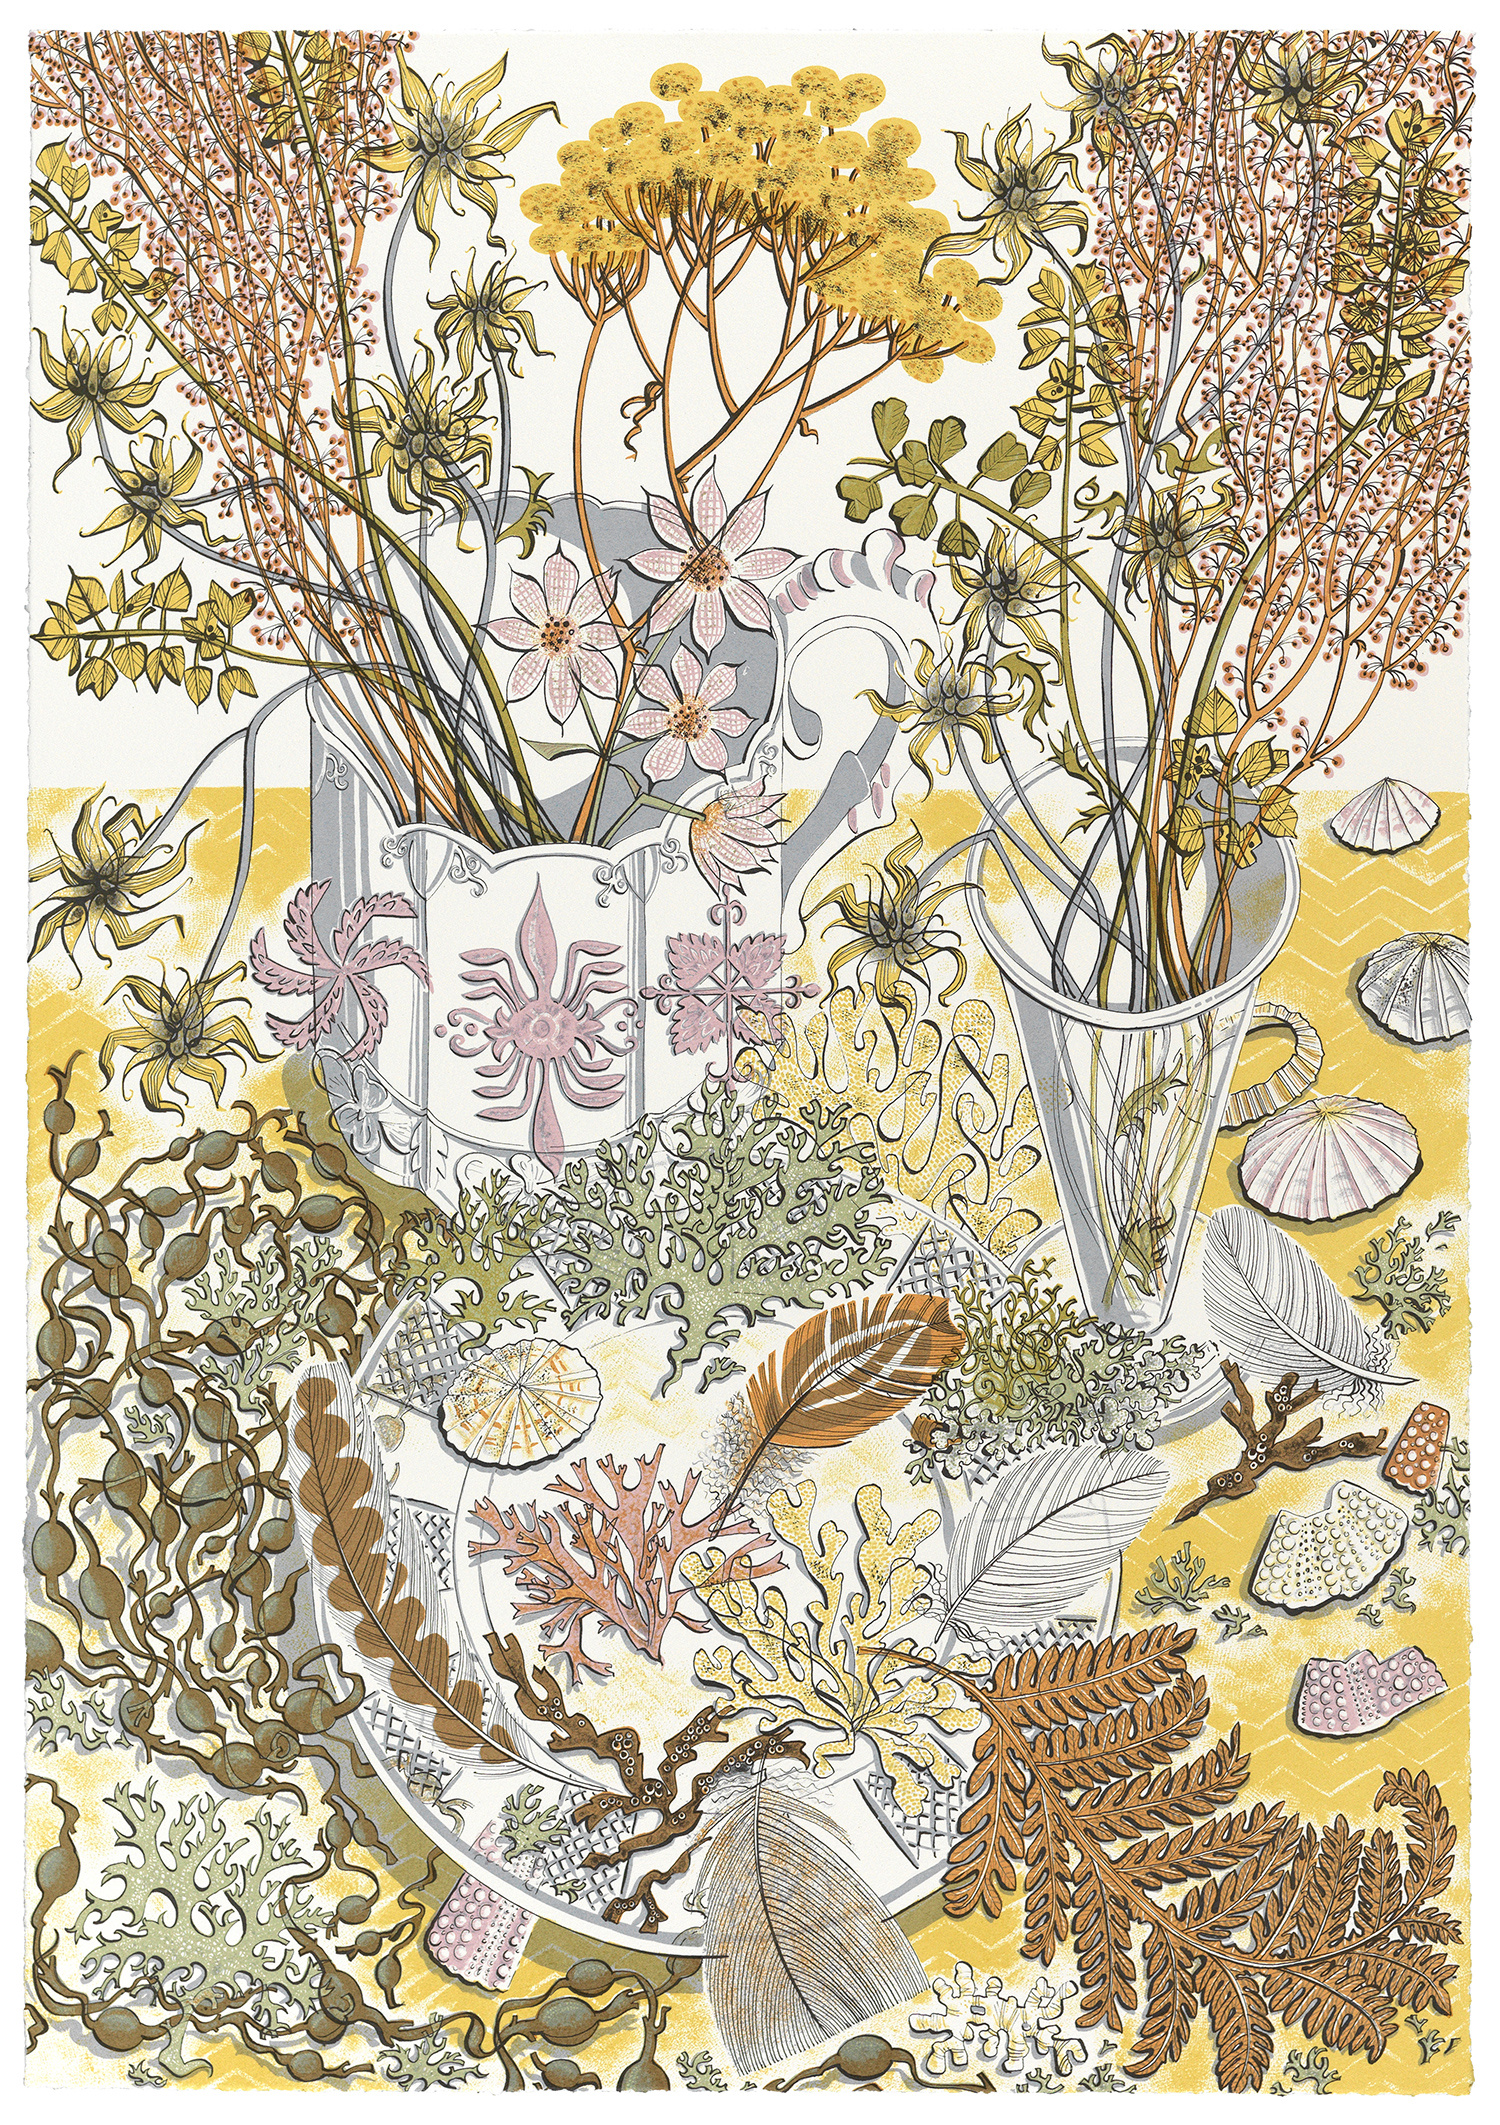 Nature Study, Late Summer by Angie Lewin